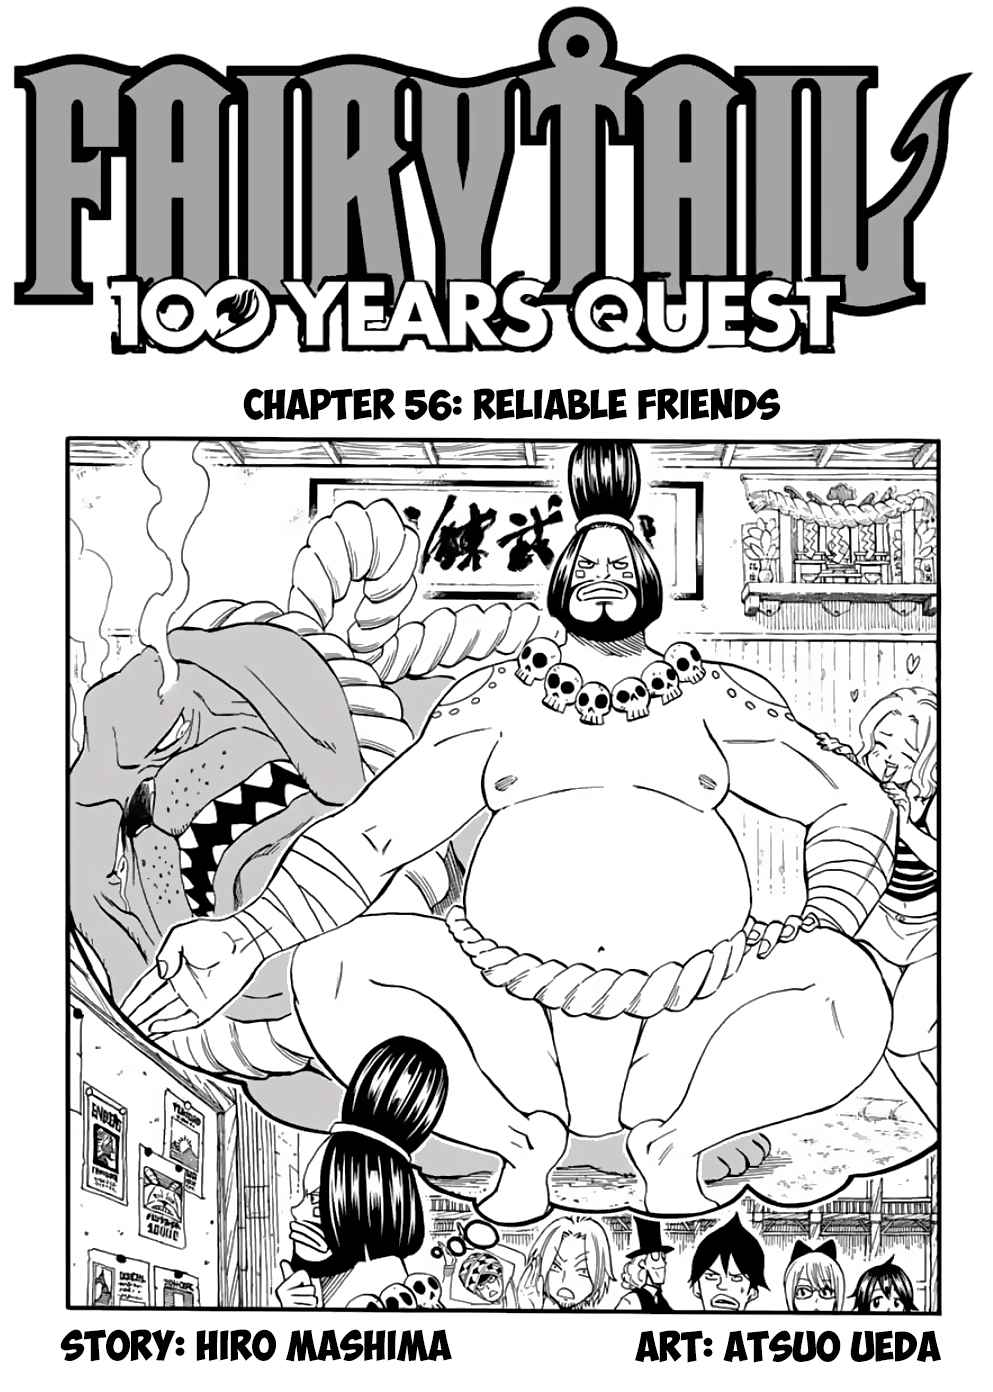 Fairy Tail: 100 Years Quest Ch. 56 Reliable Friends